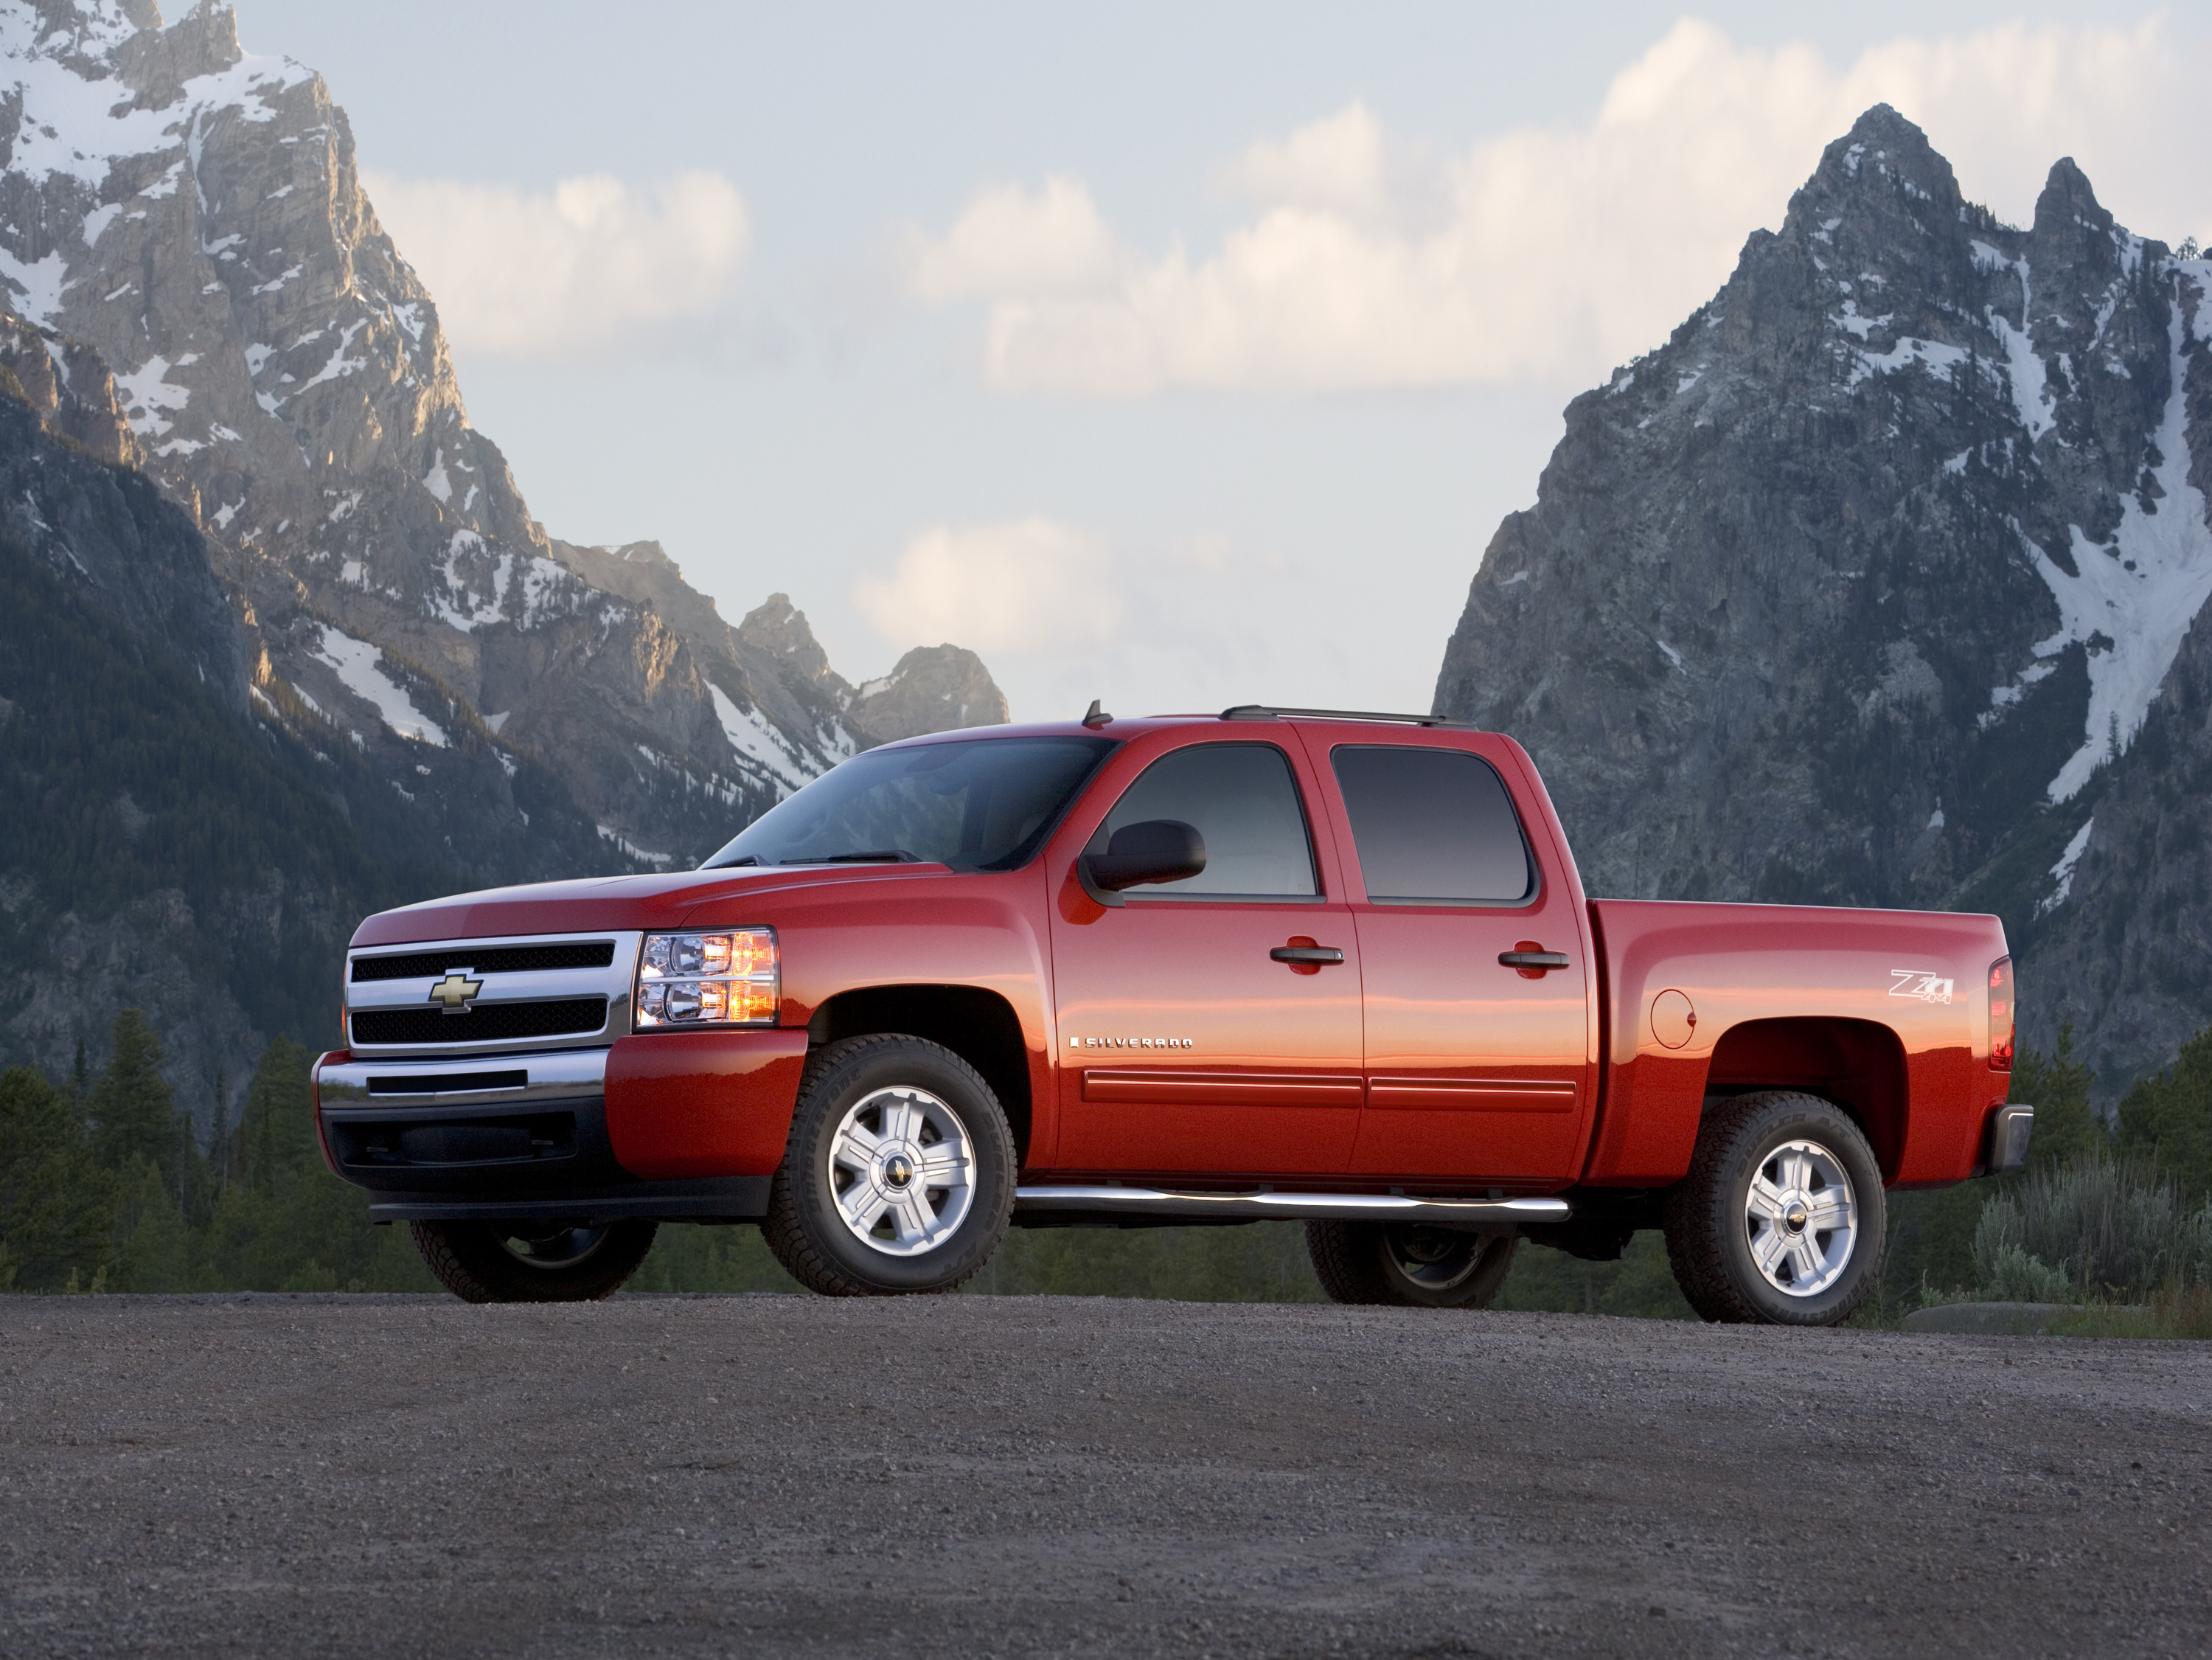 The 2010 Chevy Silverado parked in a field